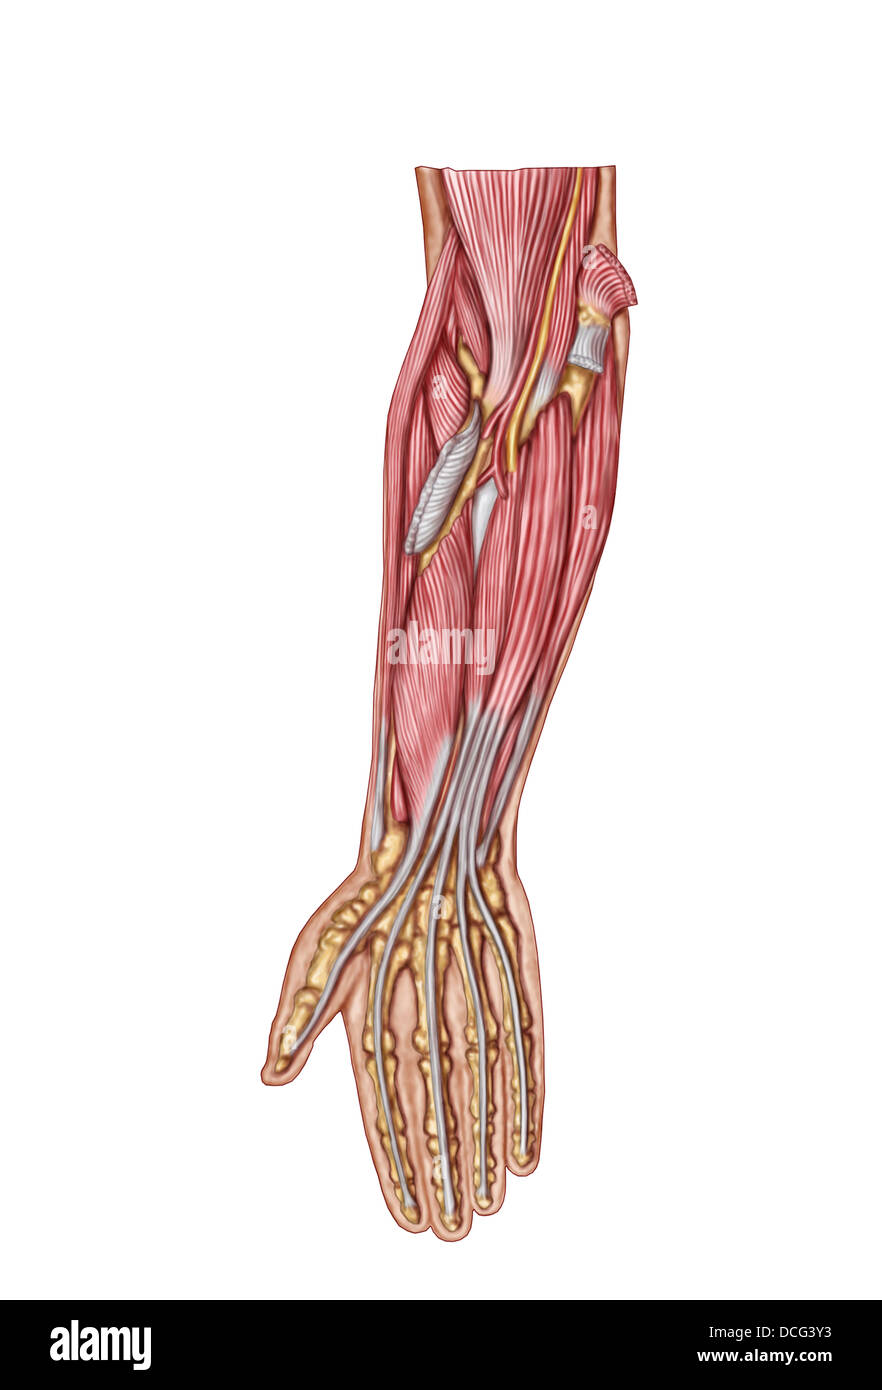 Anatomy of human forearm muscles, deep anterior view. Stock Photo